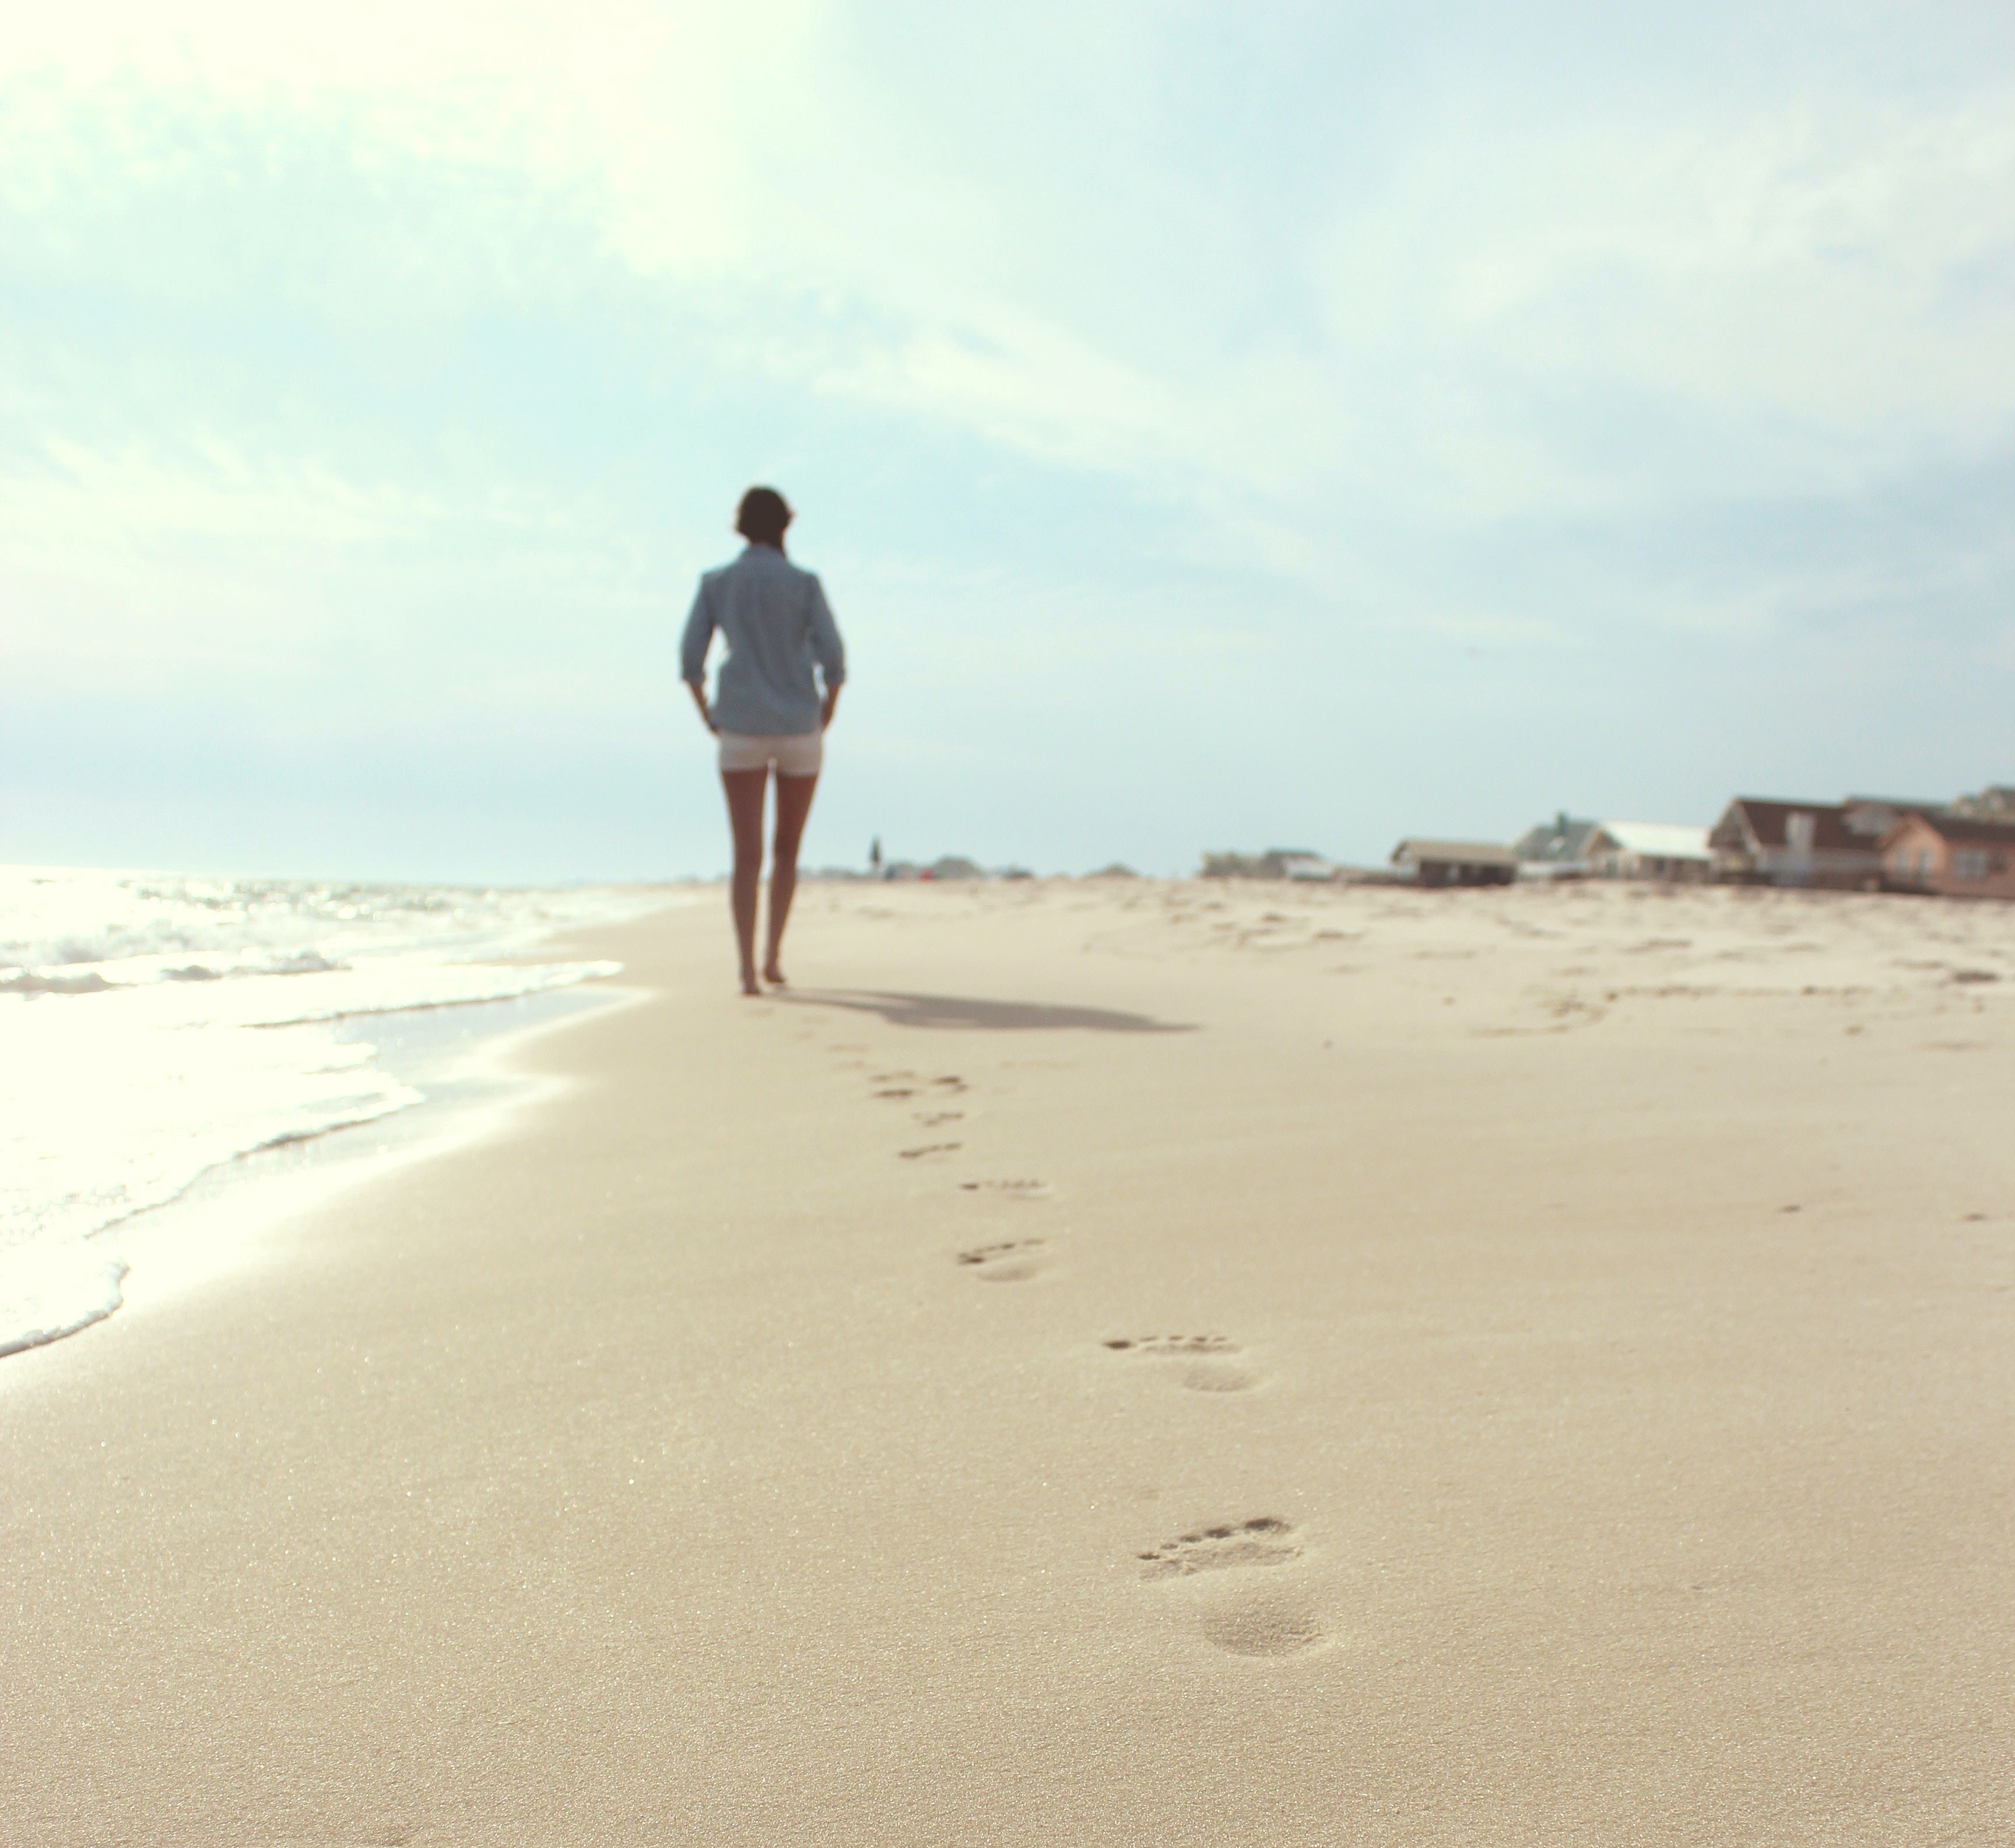 Woman-in-white shorts-walks-aways-on-beach-leaving-footsteps-in-the-white-sand